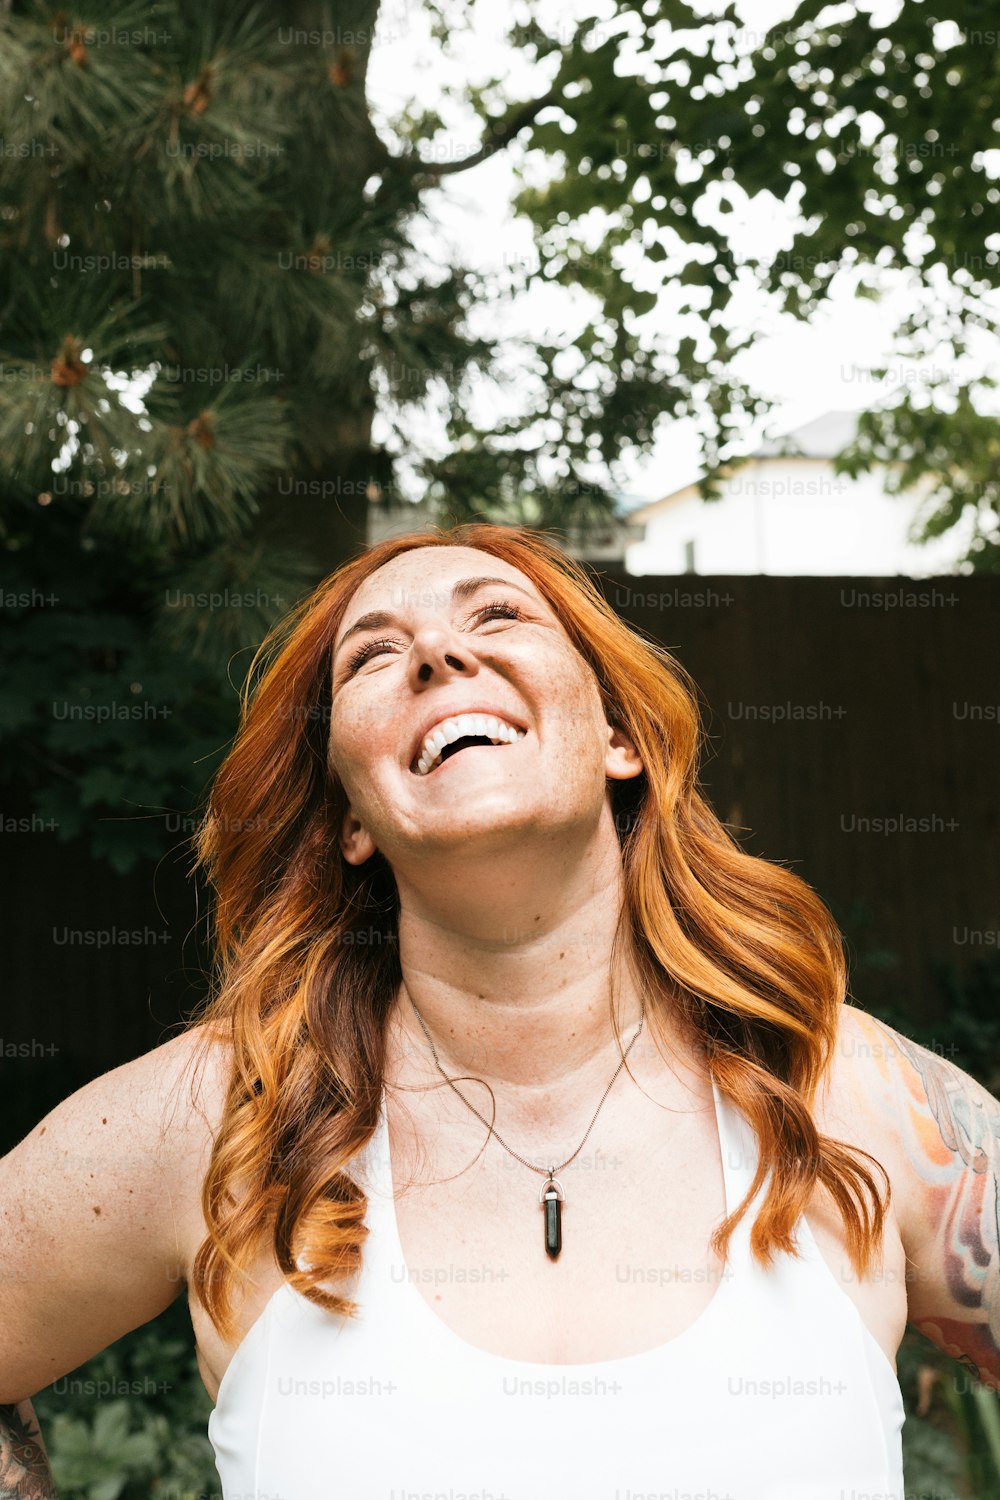 a woman with red hair is smiling and looking up